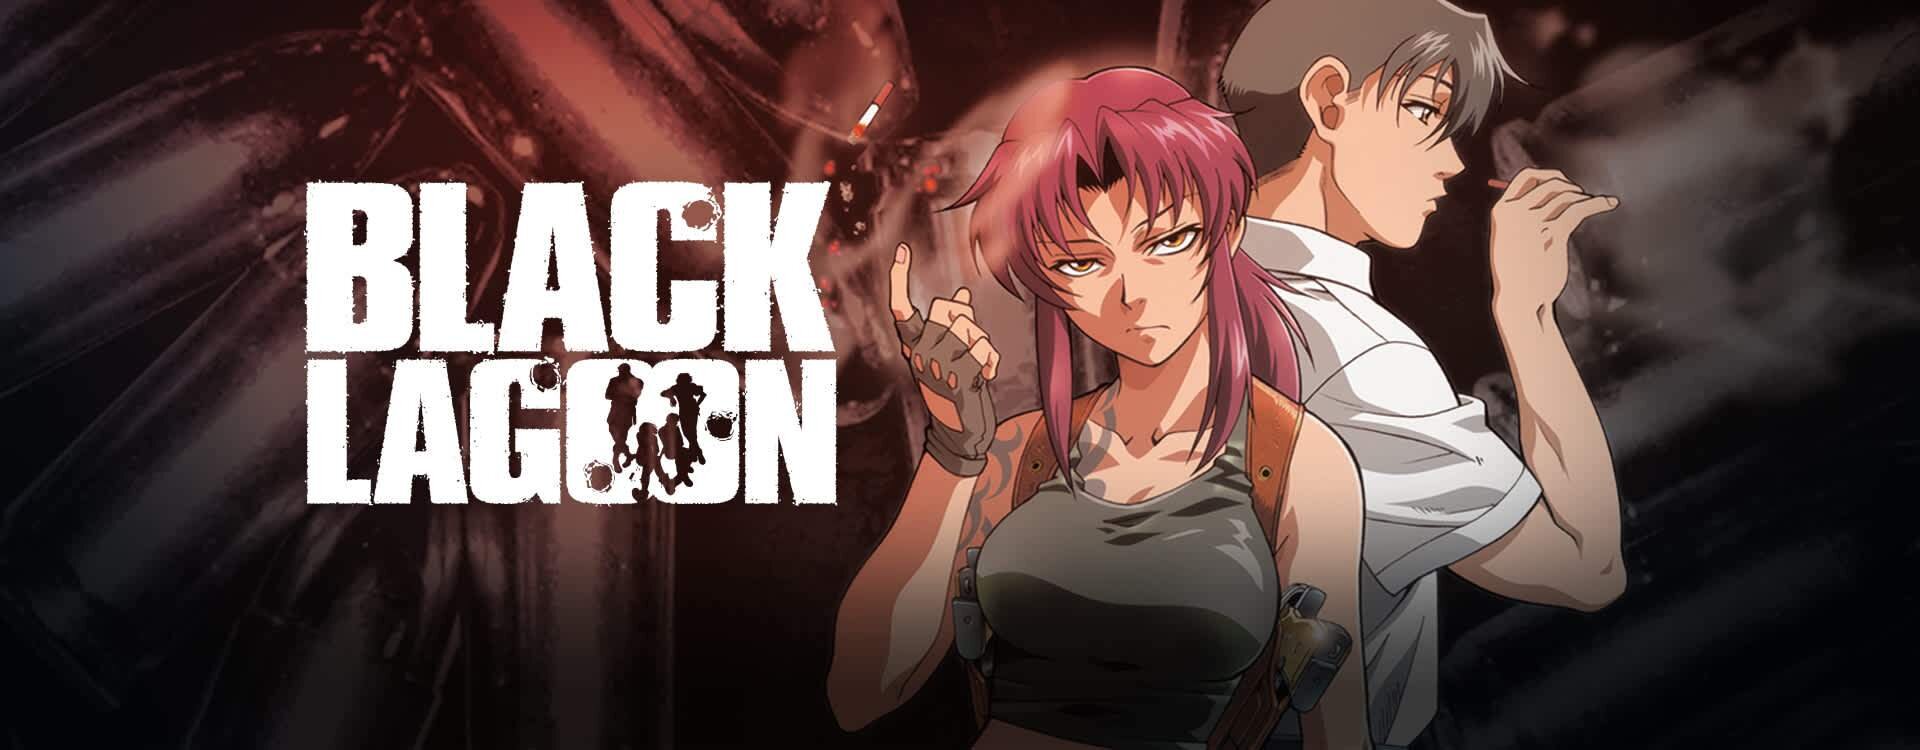 Black Lagoon Manga To Continue in September - Japan Code Supply